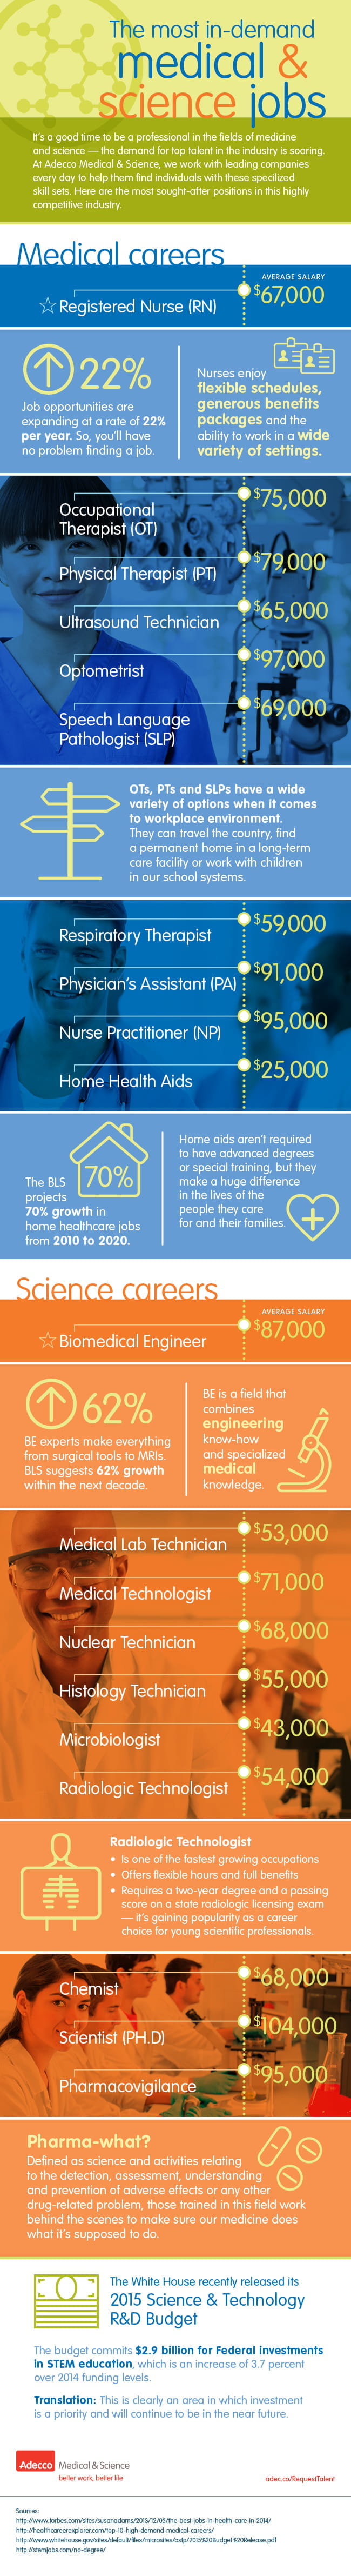 infographic - in demand medical and science jobs